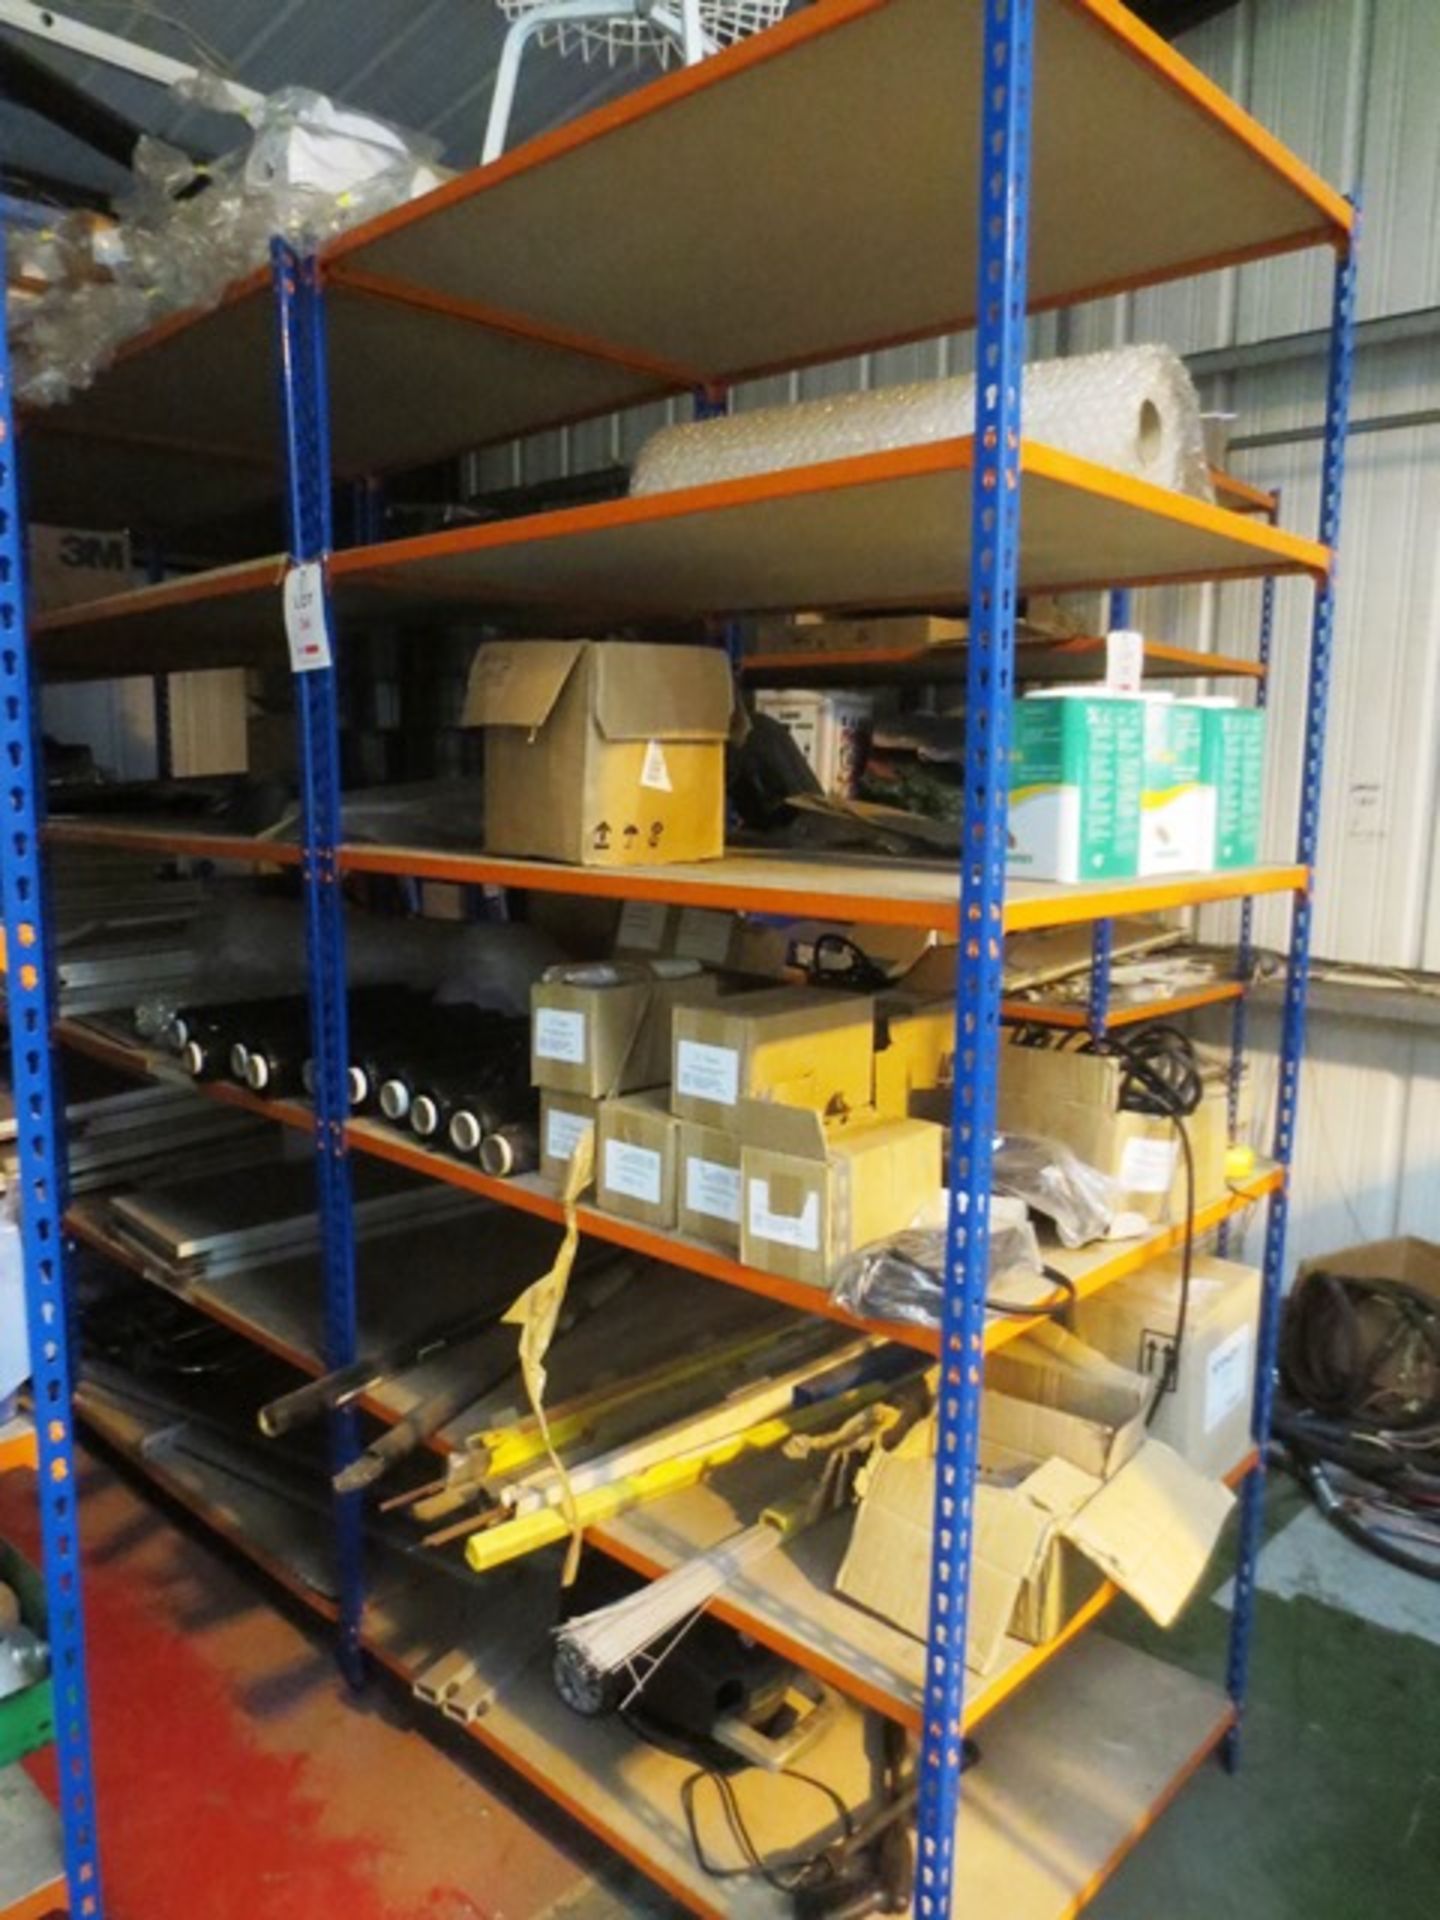 Two bays of adjustable boltless stores racking, approx 1200 x 2400mm per bay (excludes all